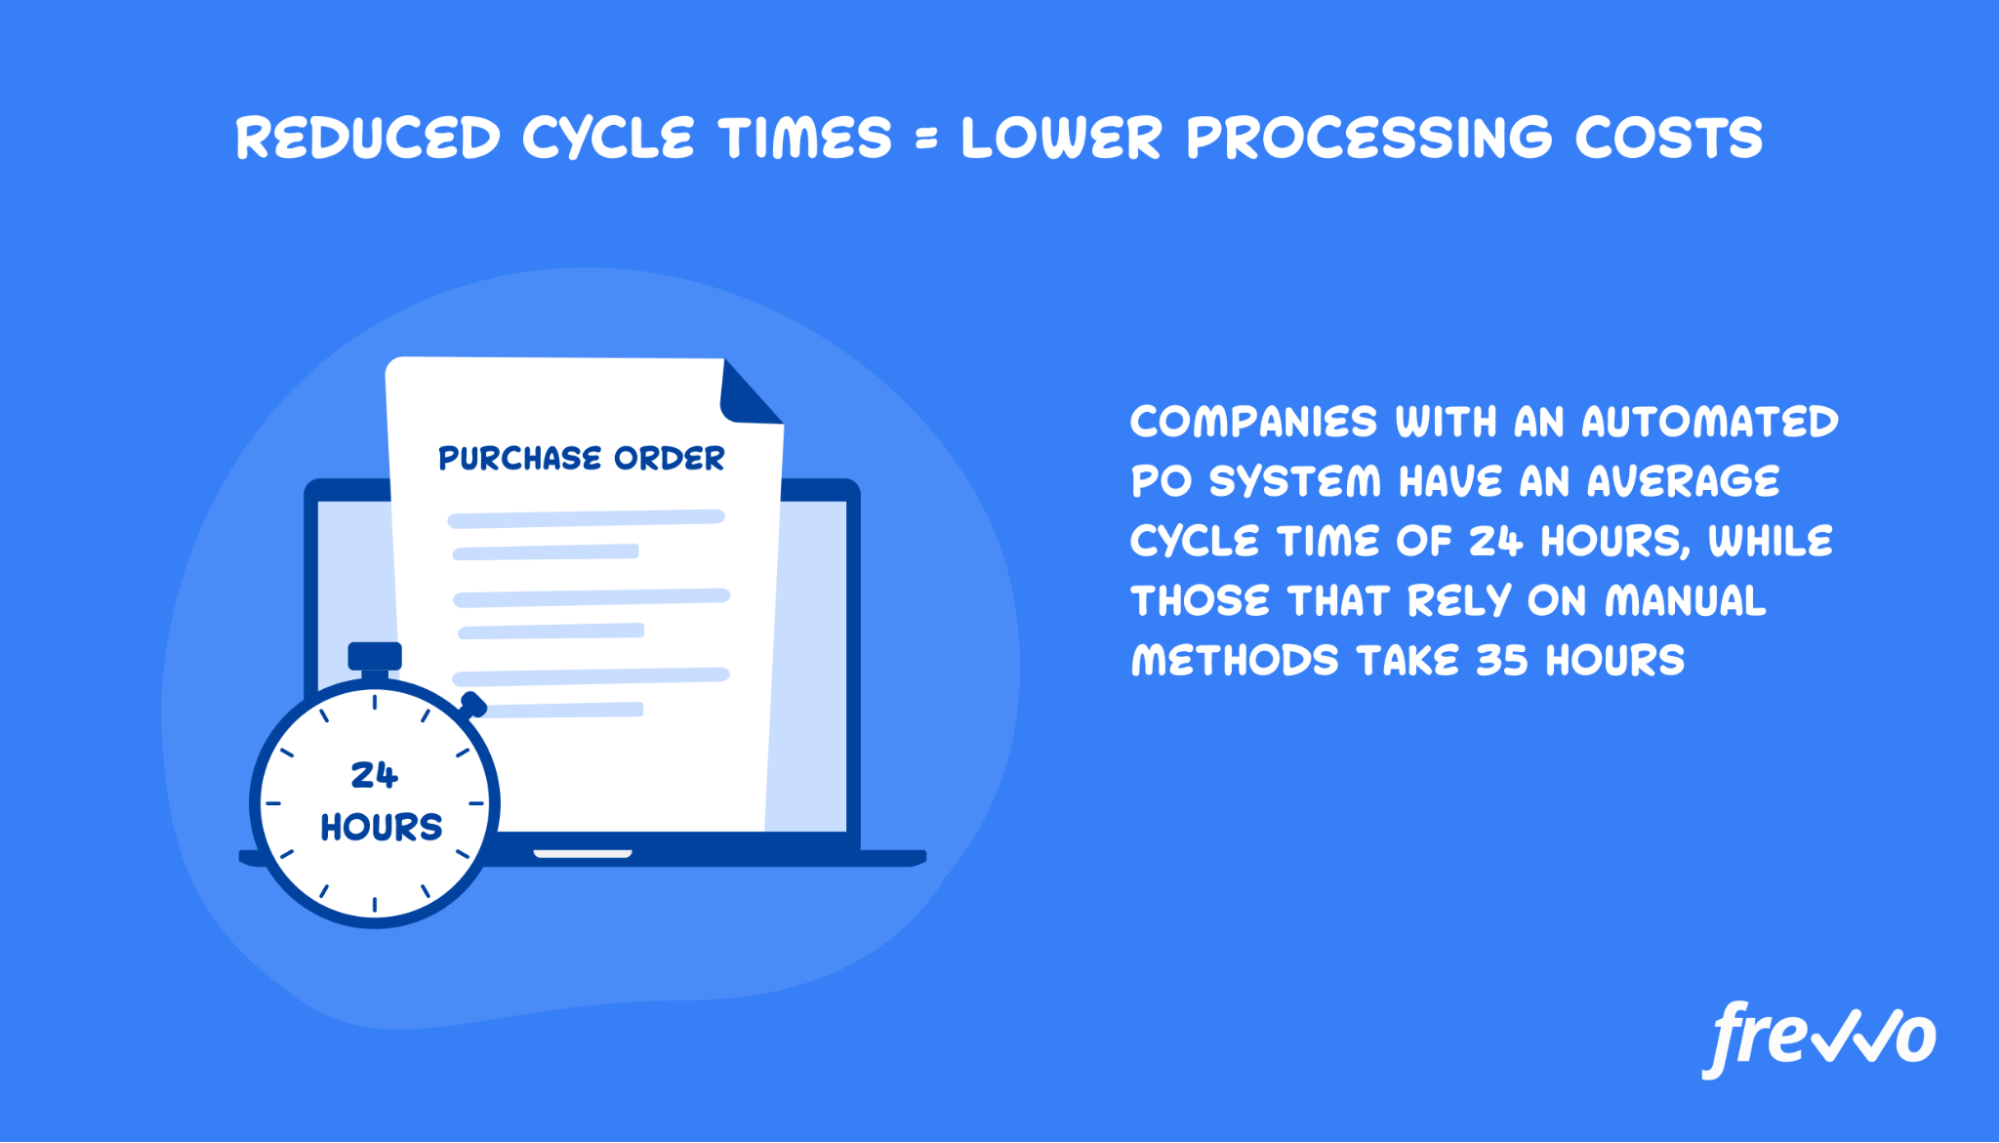 Companies with an automated purchase order system have faster cycle time